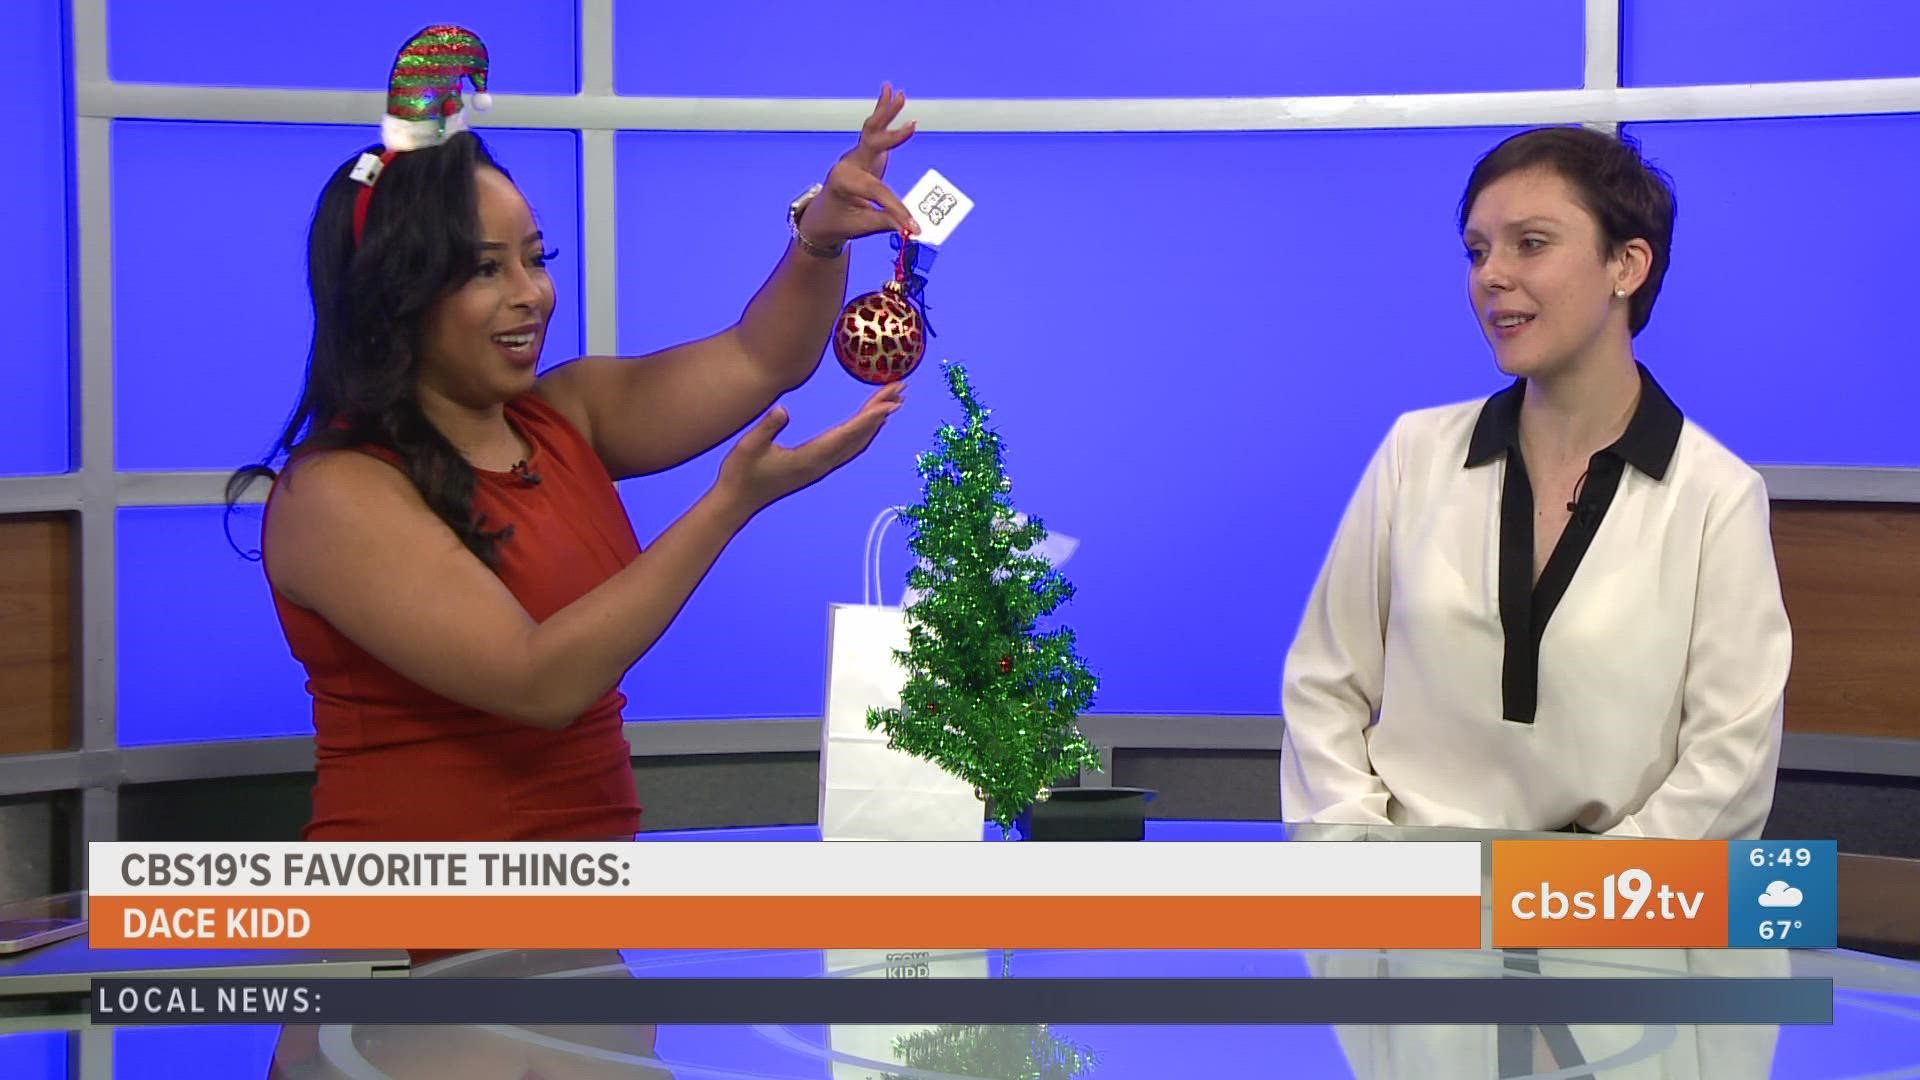 CBS19 is celebrating East Texas this holiday season with a list of our favorite things! Today’s item is a custom ornament by Dace Kidd.